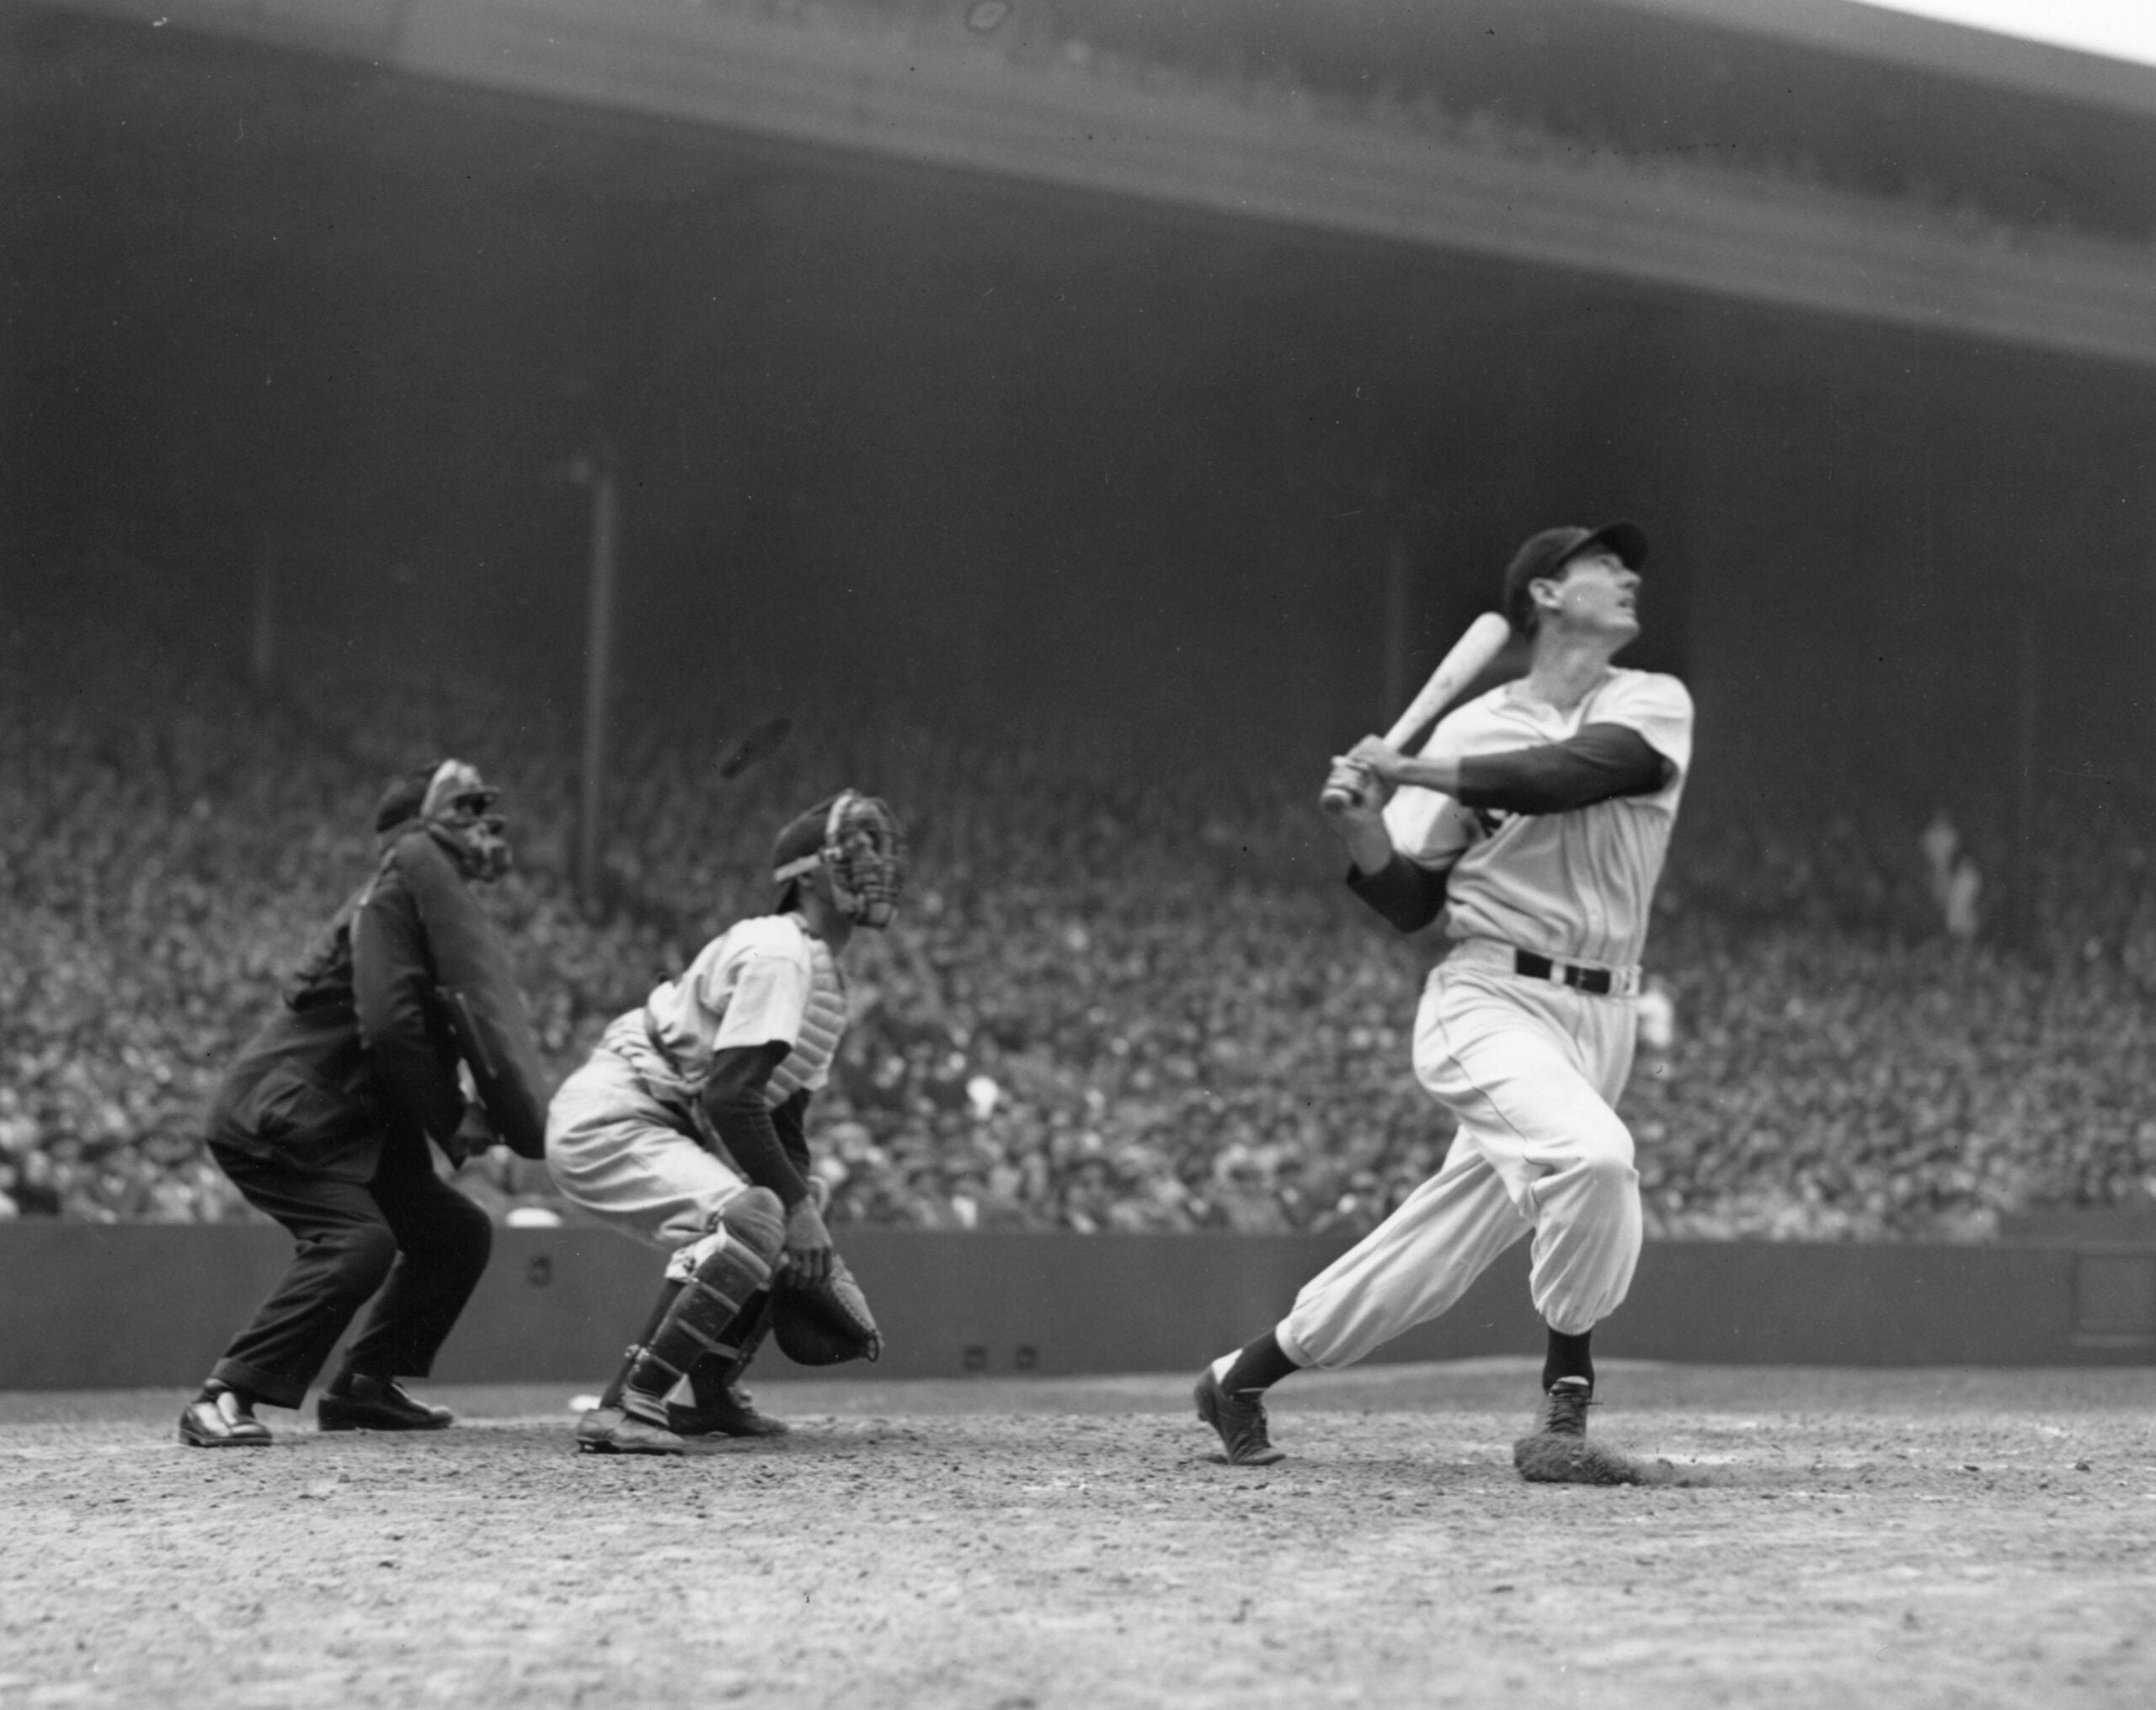 Red Sox leftfielder Ted Williams hits a home run at Fenway Park in 1948.